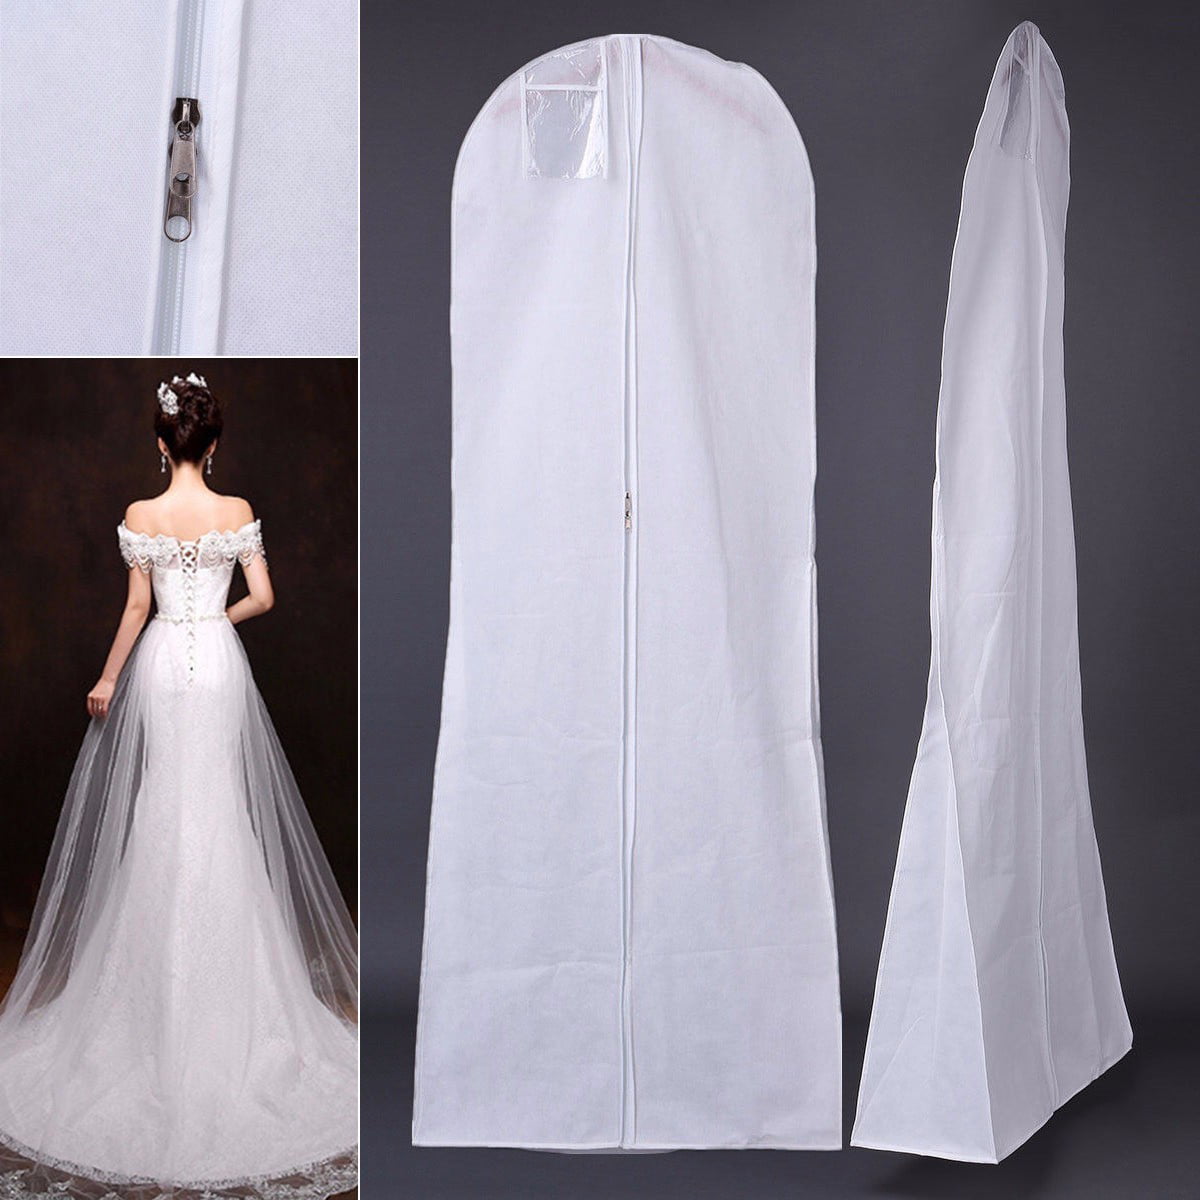 72" Breathable Long Wedding Dress Cover Prom Bridal Gown Garment Storage Zip Bag